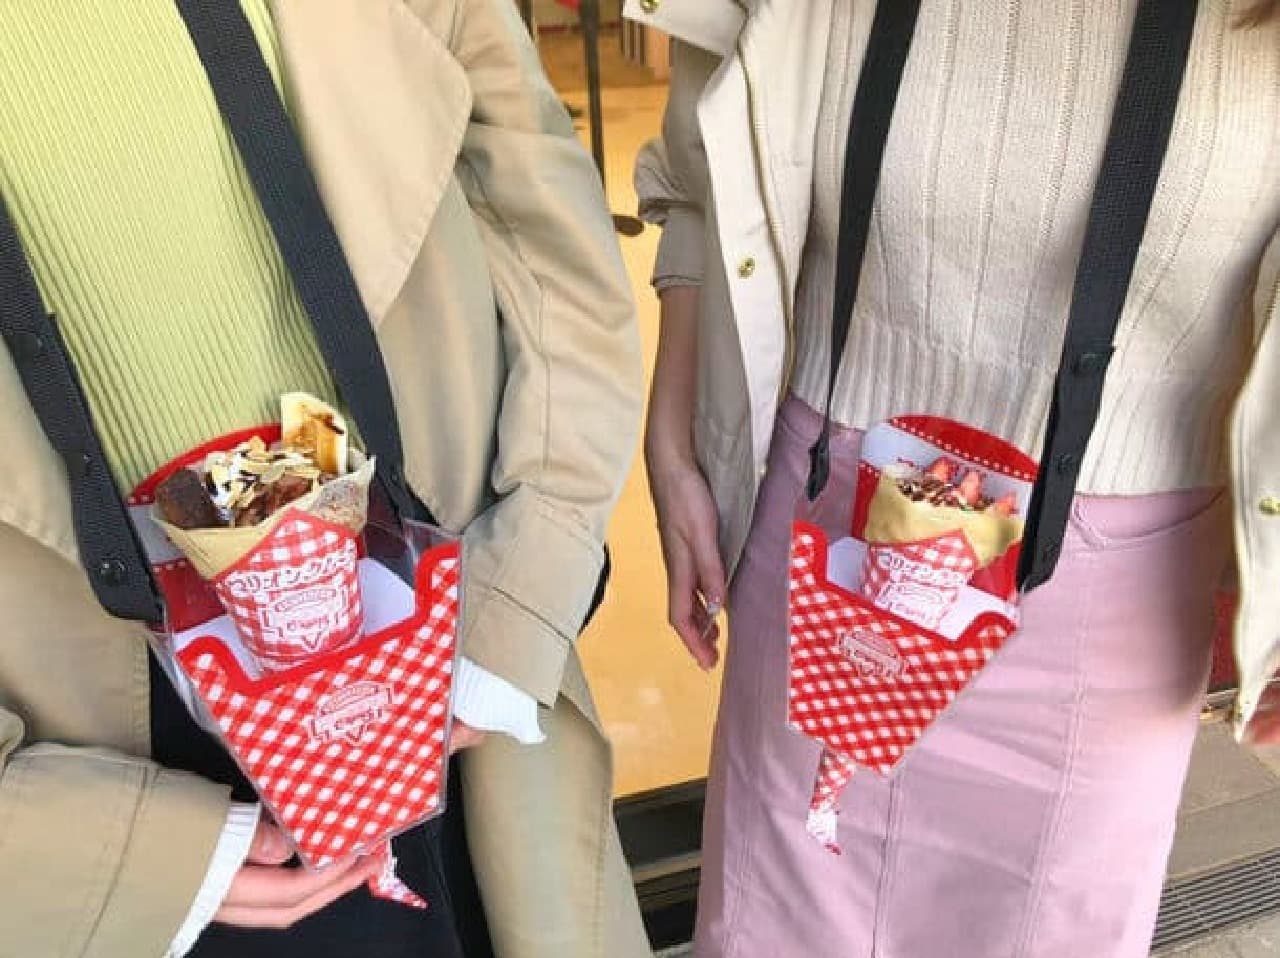 Marion Crepe "Crepe Holder" at Ji Outlet Shonan Hiratsuka -- Convenient for eating and walking around with crepes! Tote bags and kitchenware are also featured!